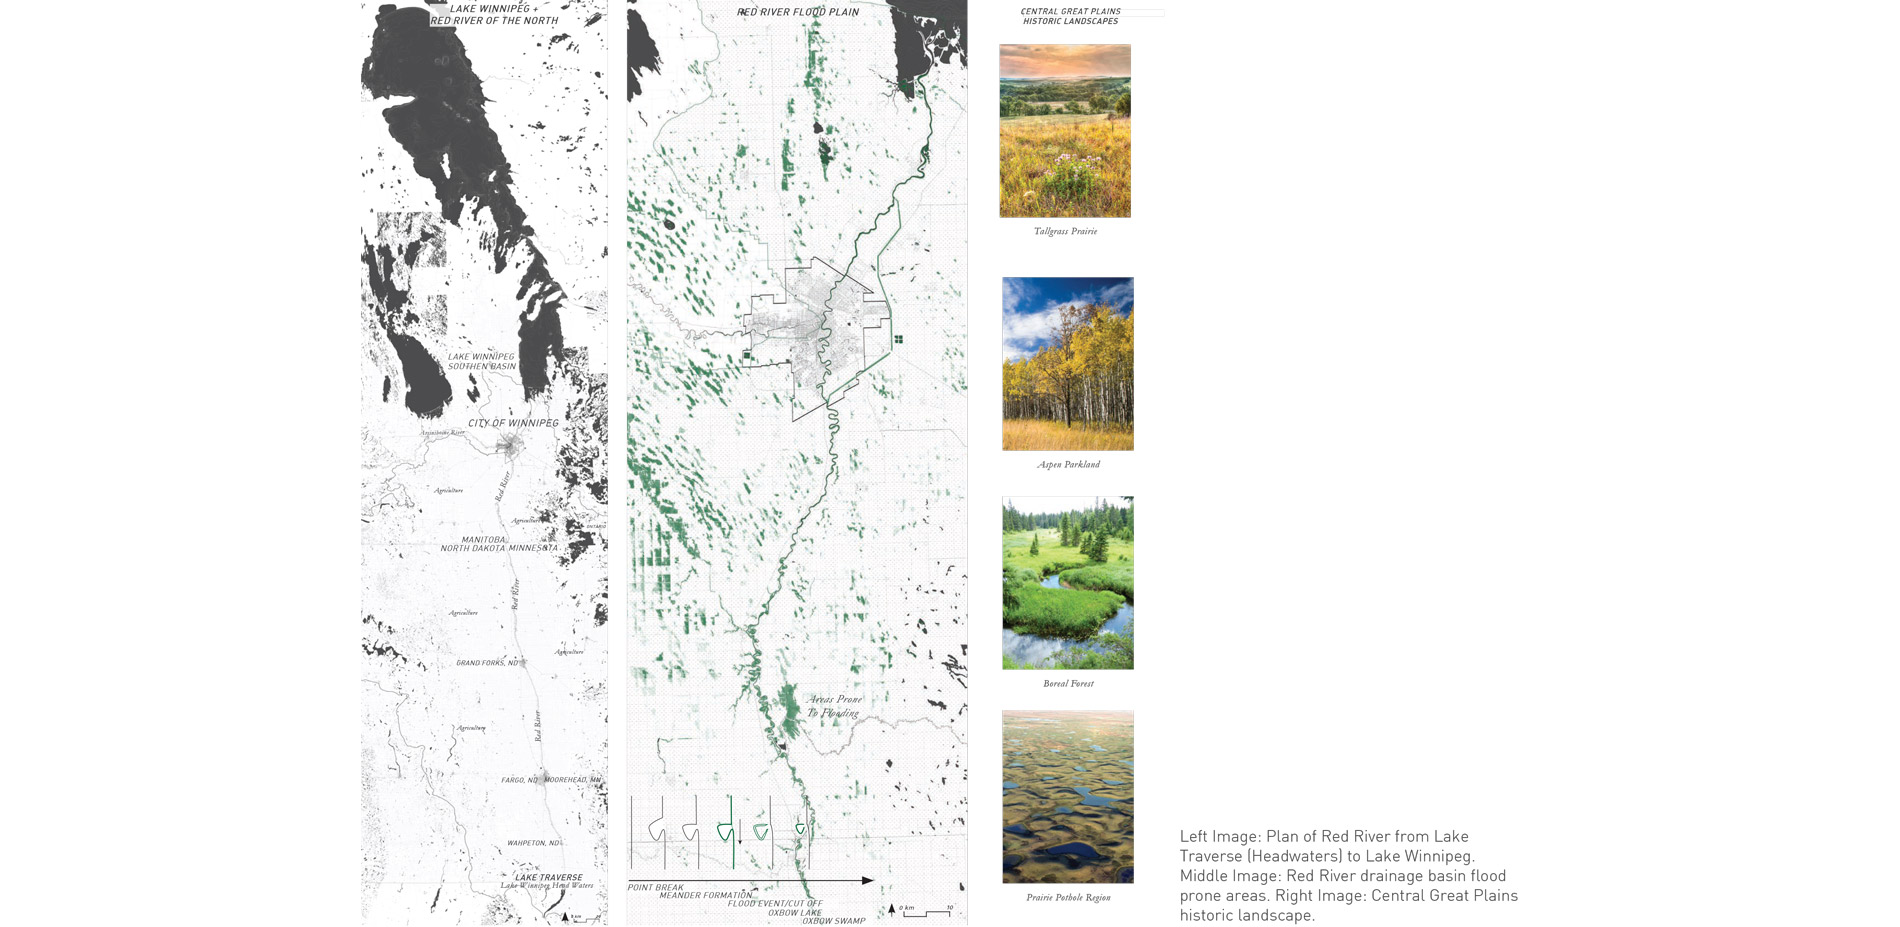 Left Image: Plan of Red River from Lake Traverse (Headwaters) to Lake Winnipeg.
                        Middle Image: Red River drainage basin flood prone areas. Right Image:…